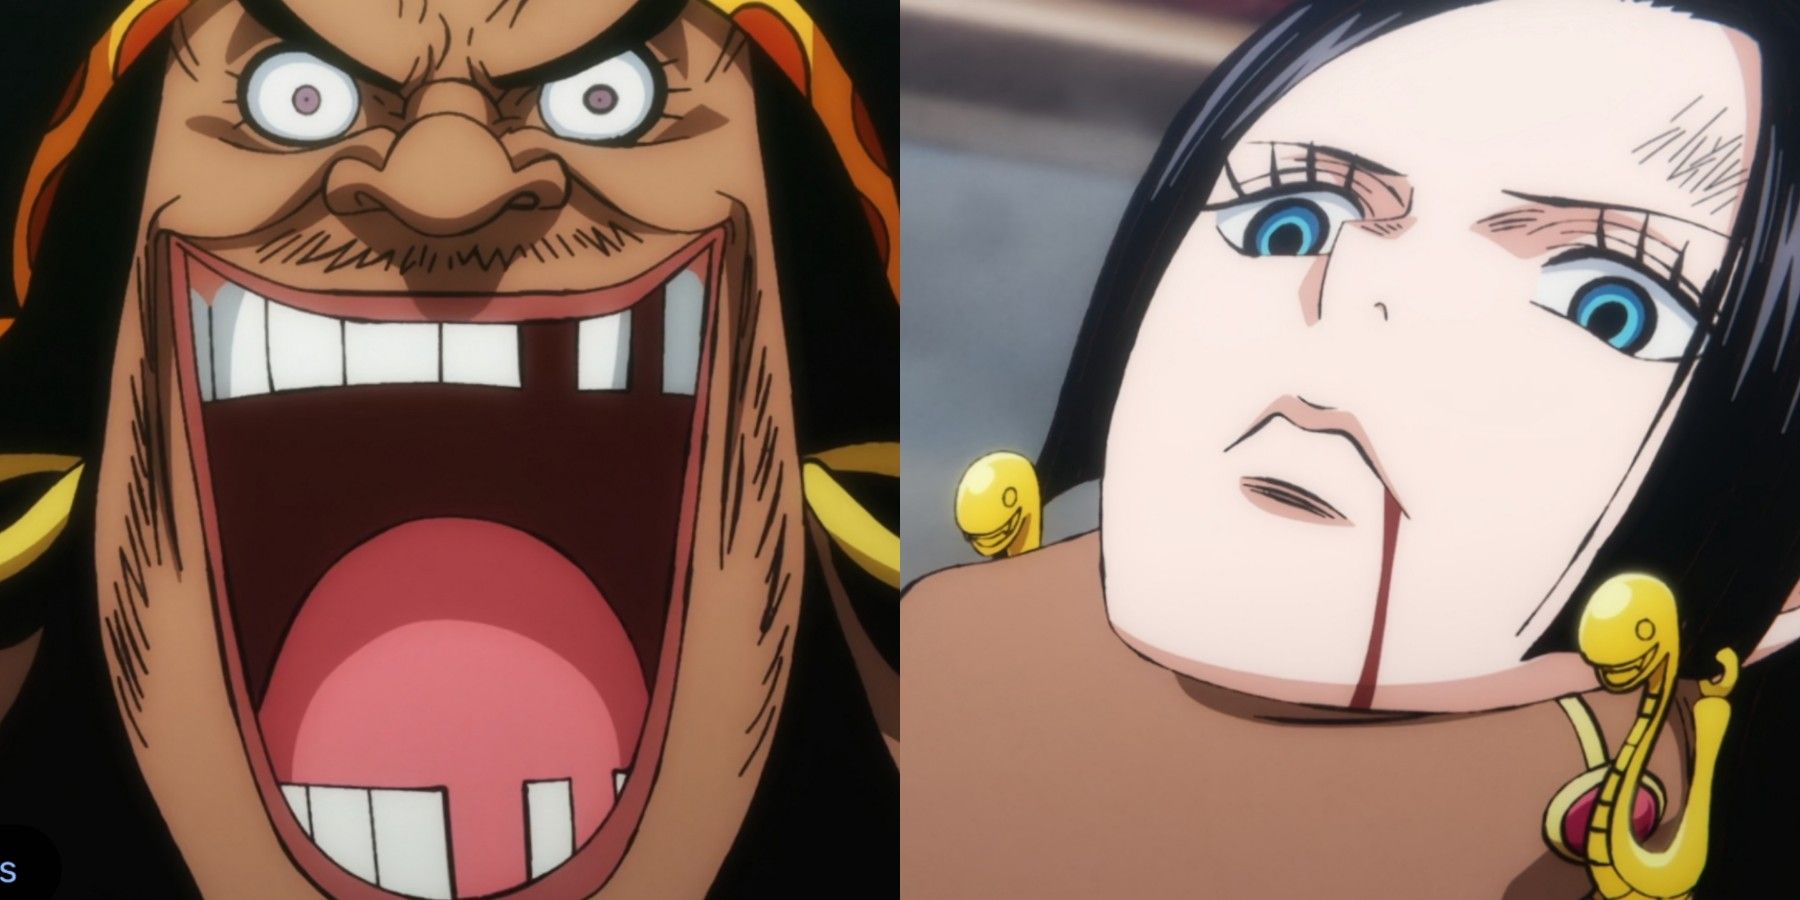 one piece episode 1088 release date: One Piece Episode 1088 release date:  Spoilers, time, where to watch - The Economic Times